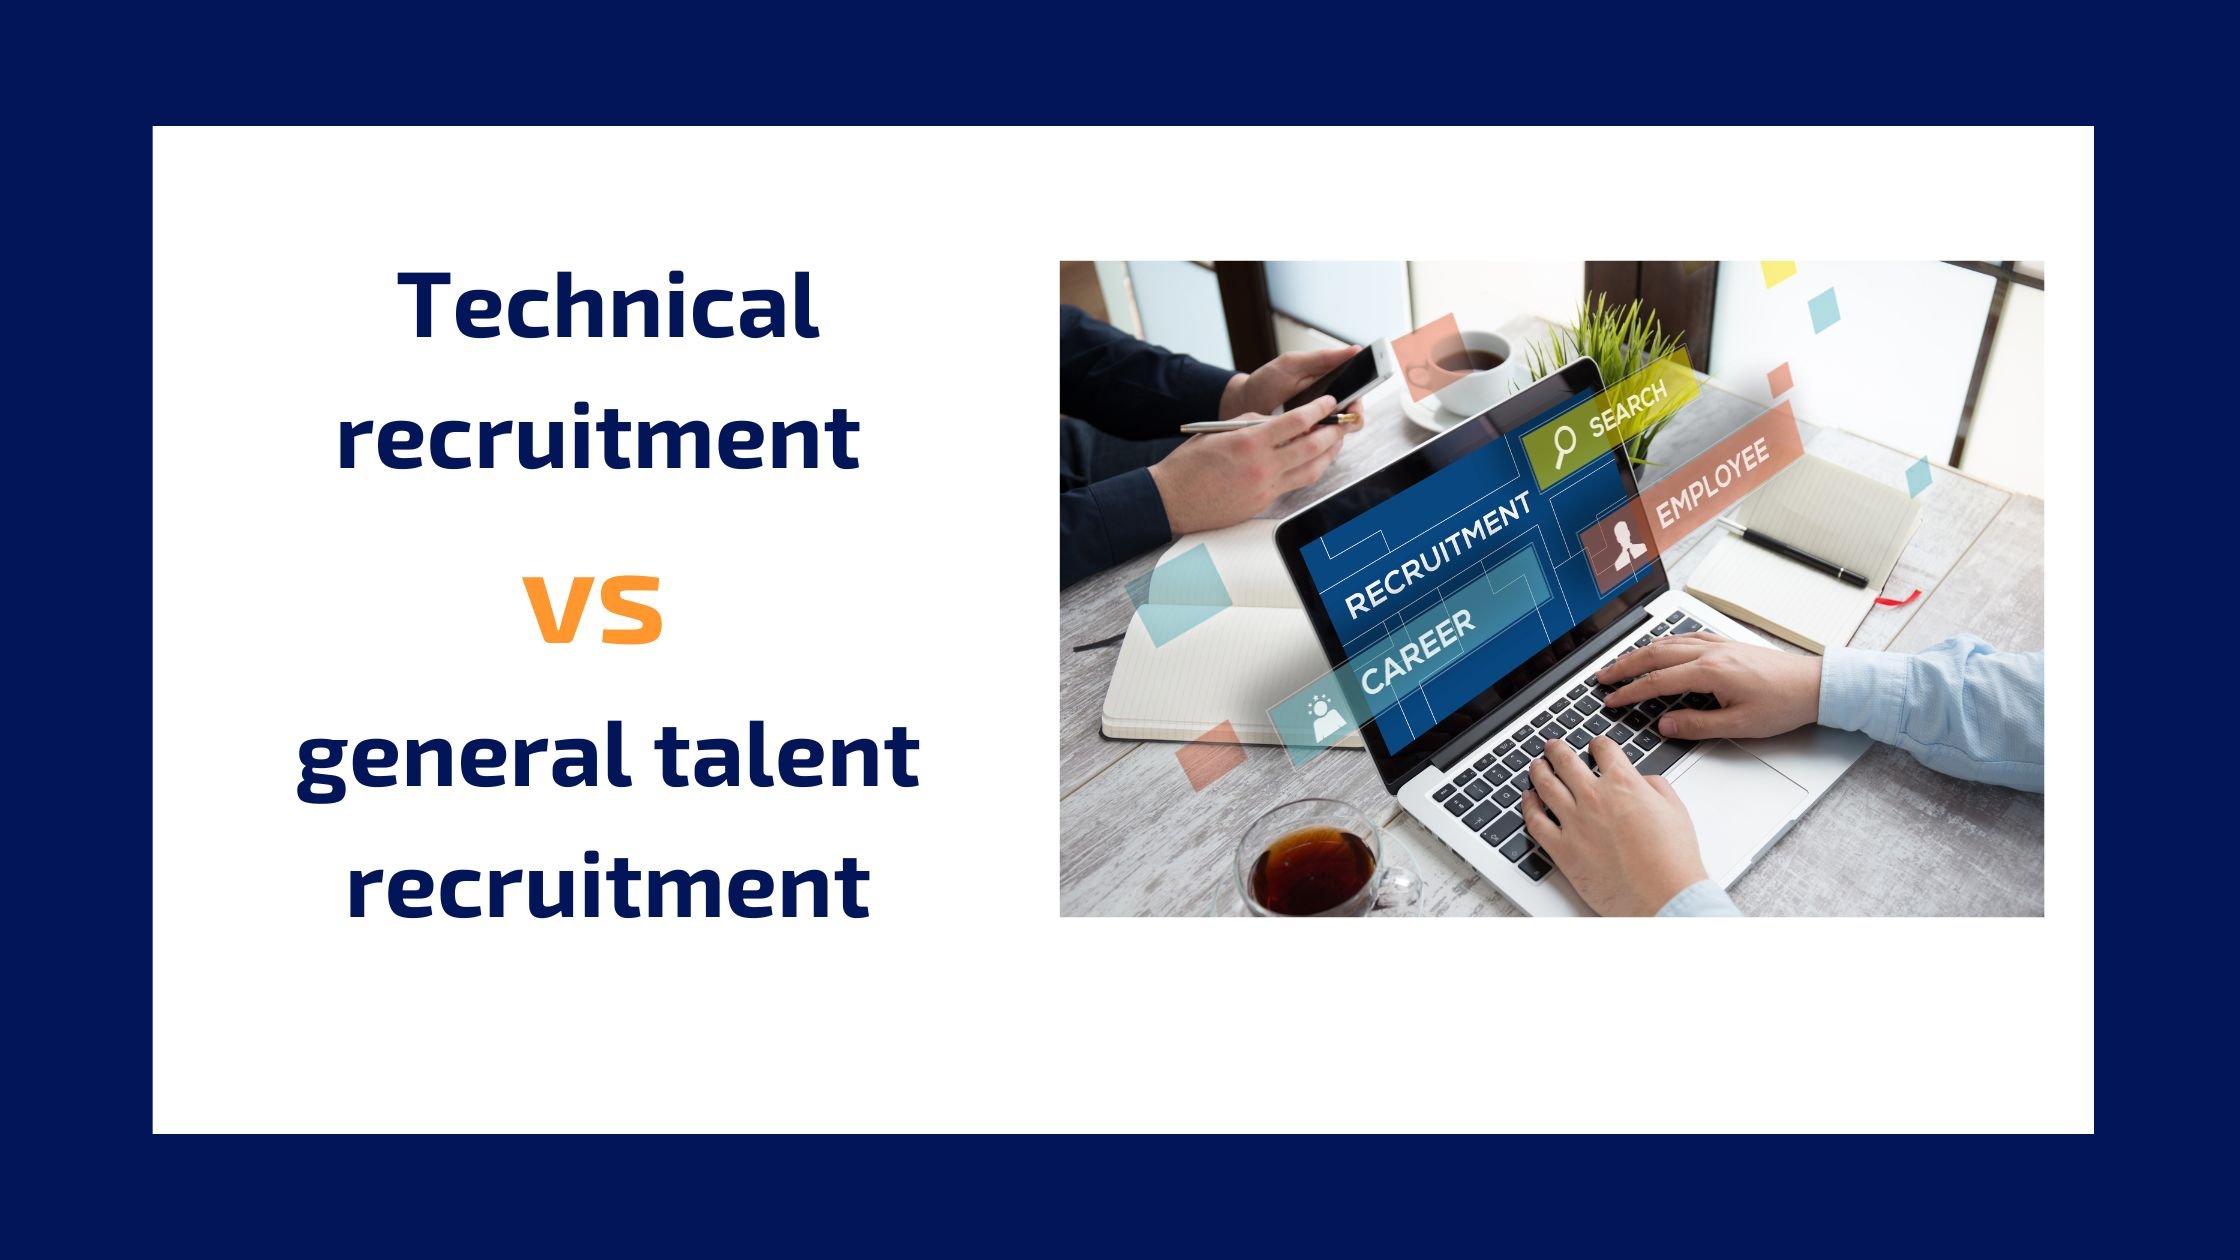 how is technical recruiting different from general talent recruitment